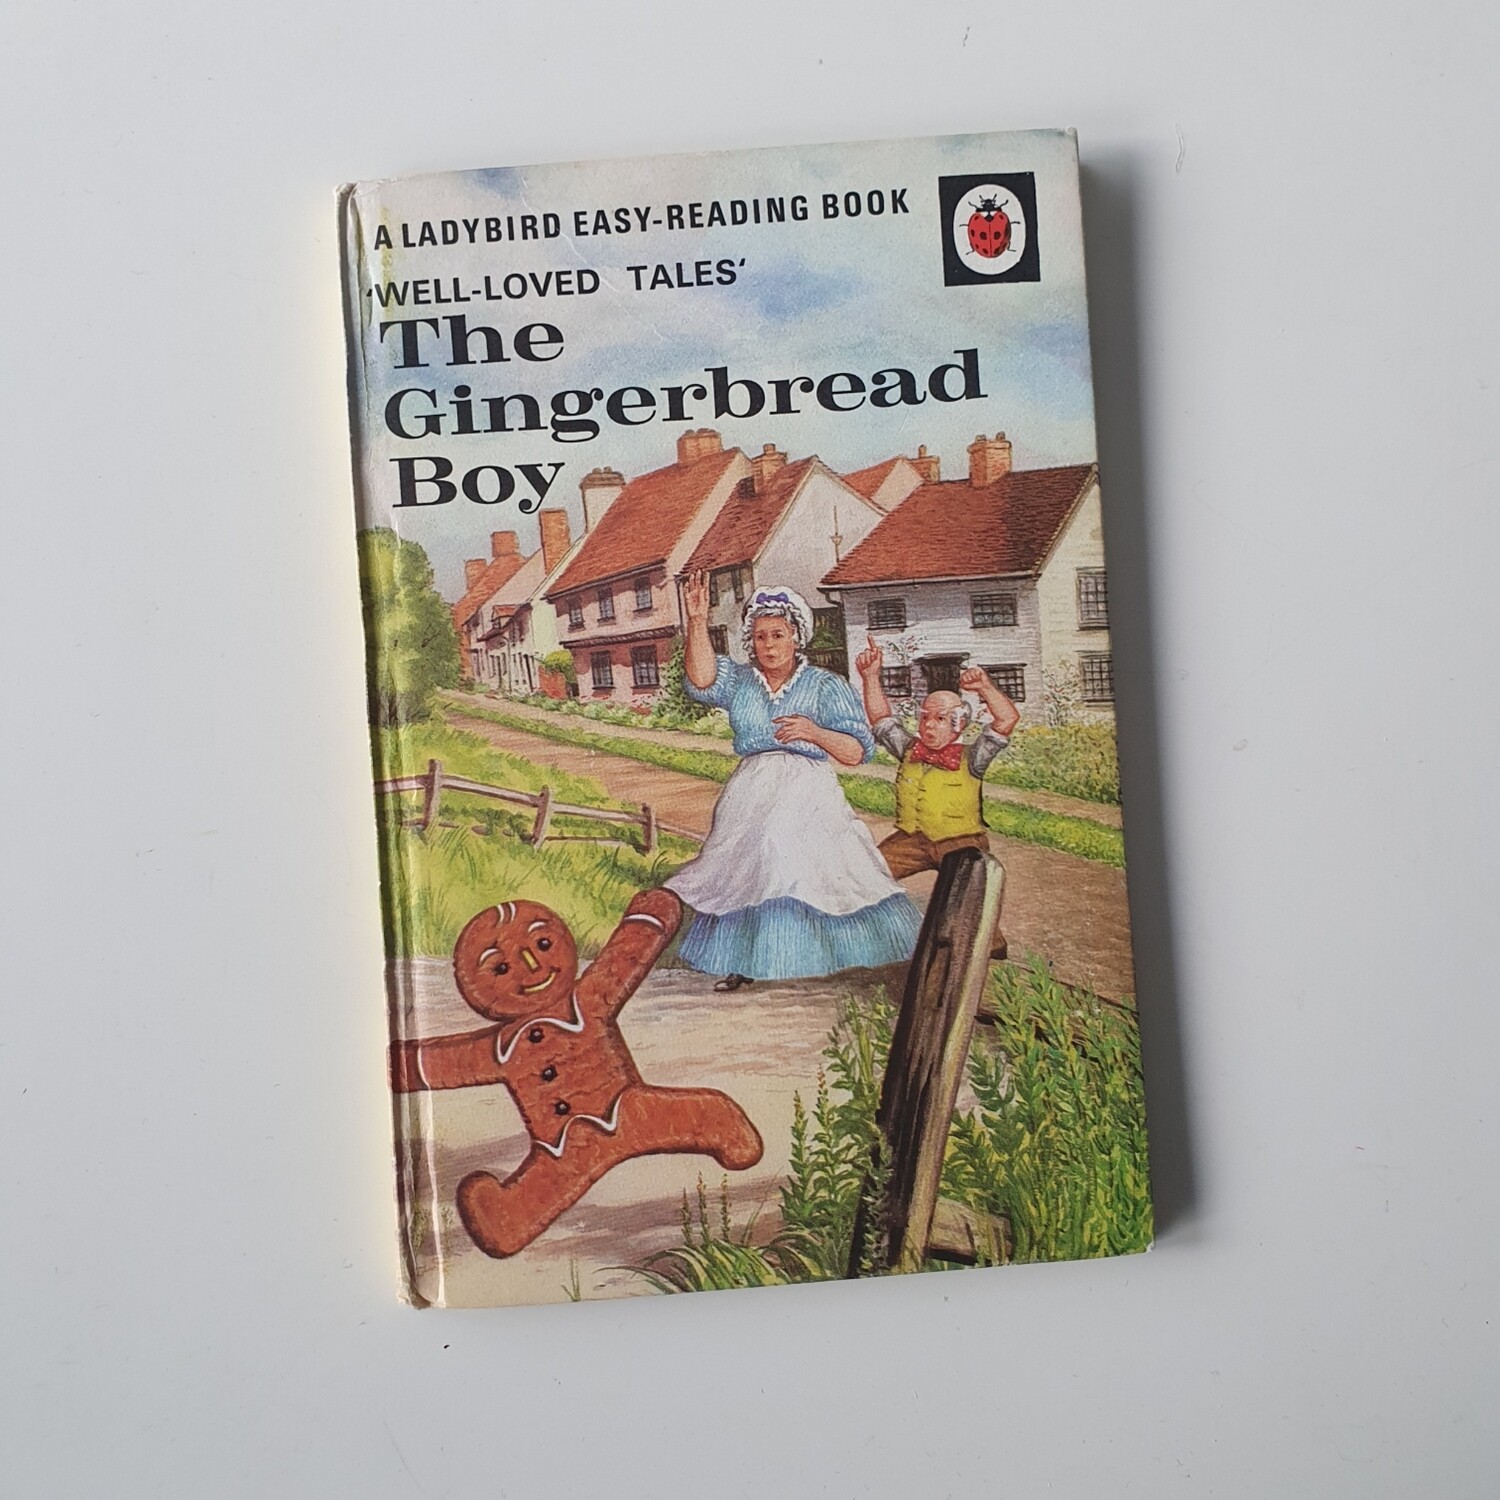 The Gingerbread Boy Notebook - Ladybird book - well loved tales